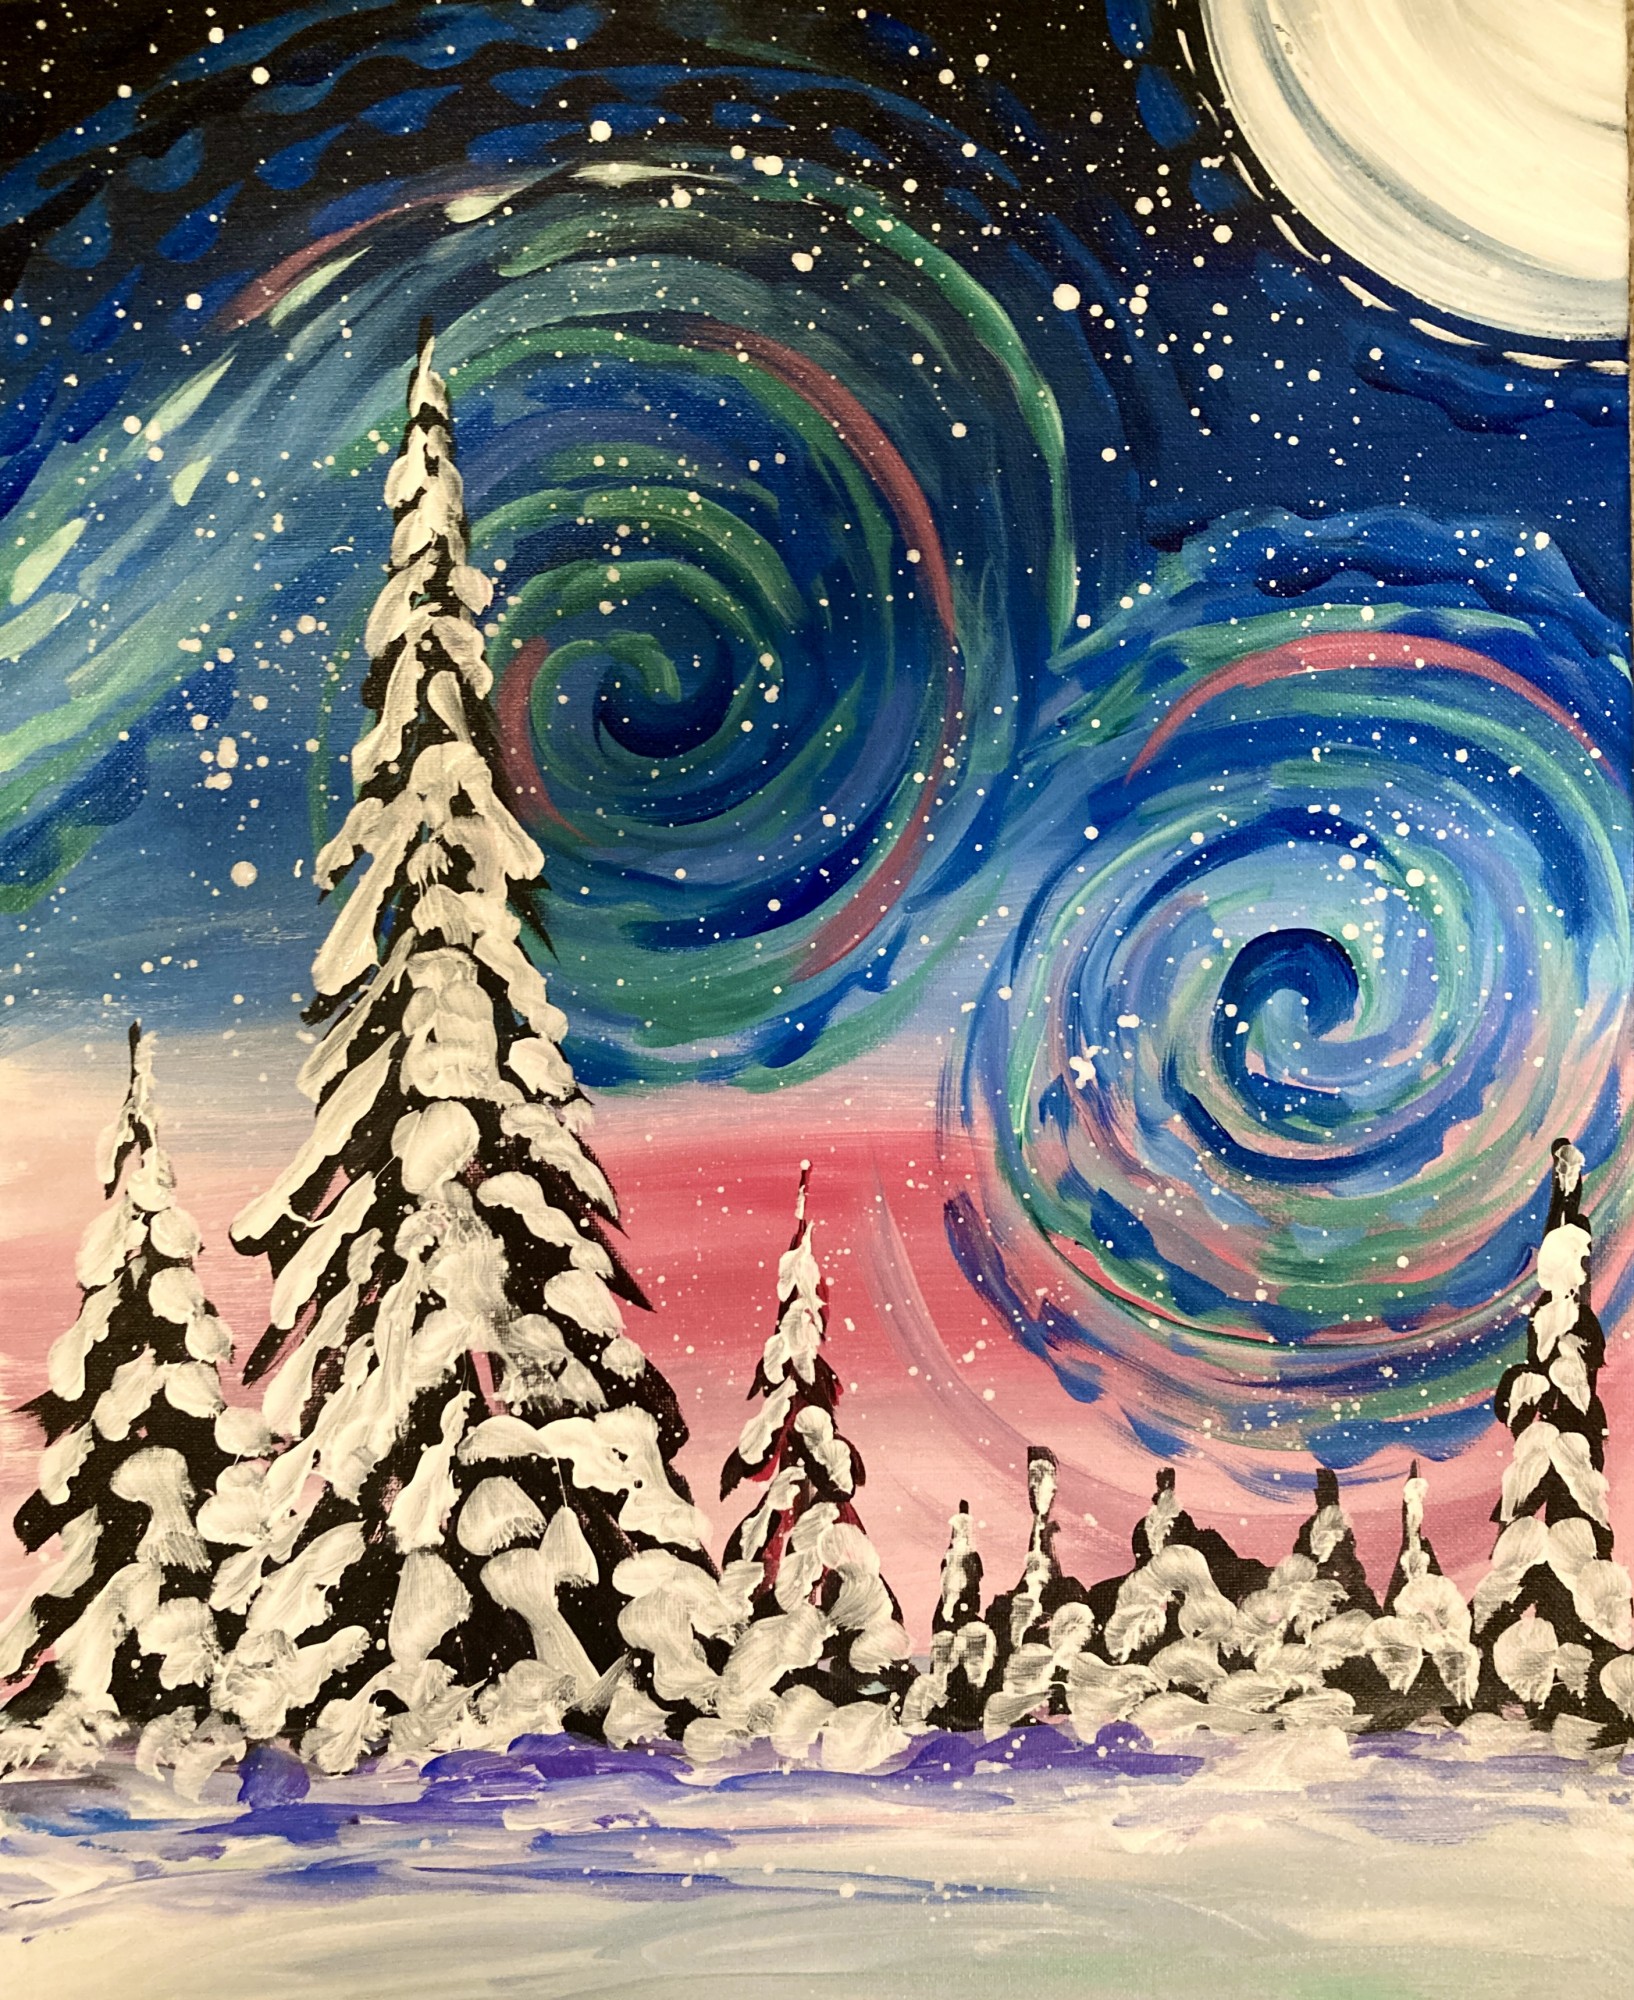 Whimsical Winter Wonderland 3pm SPECIAL $35